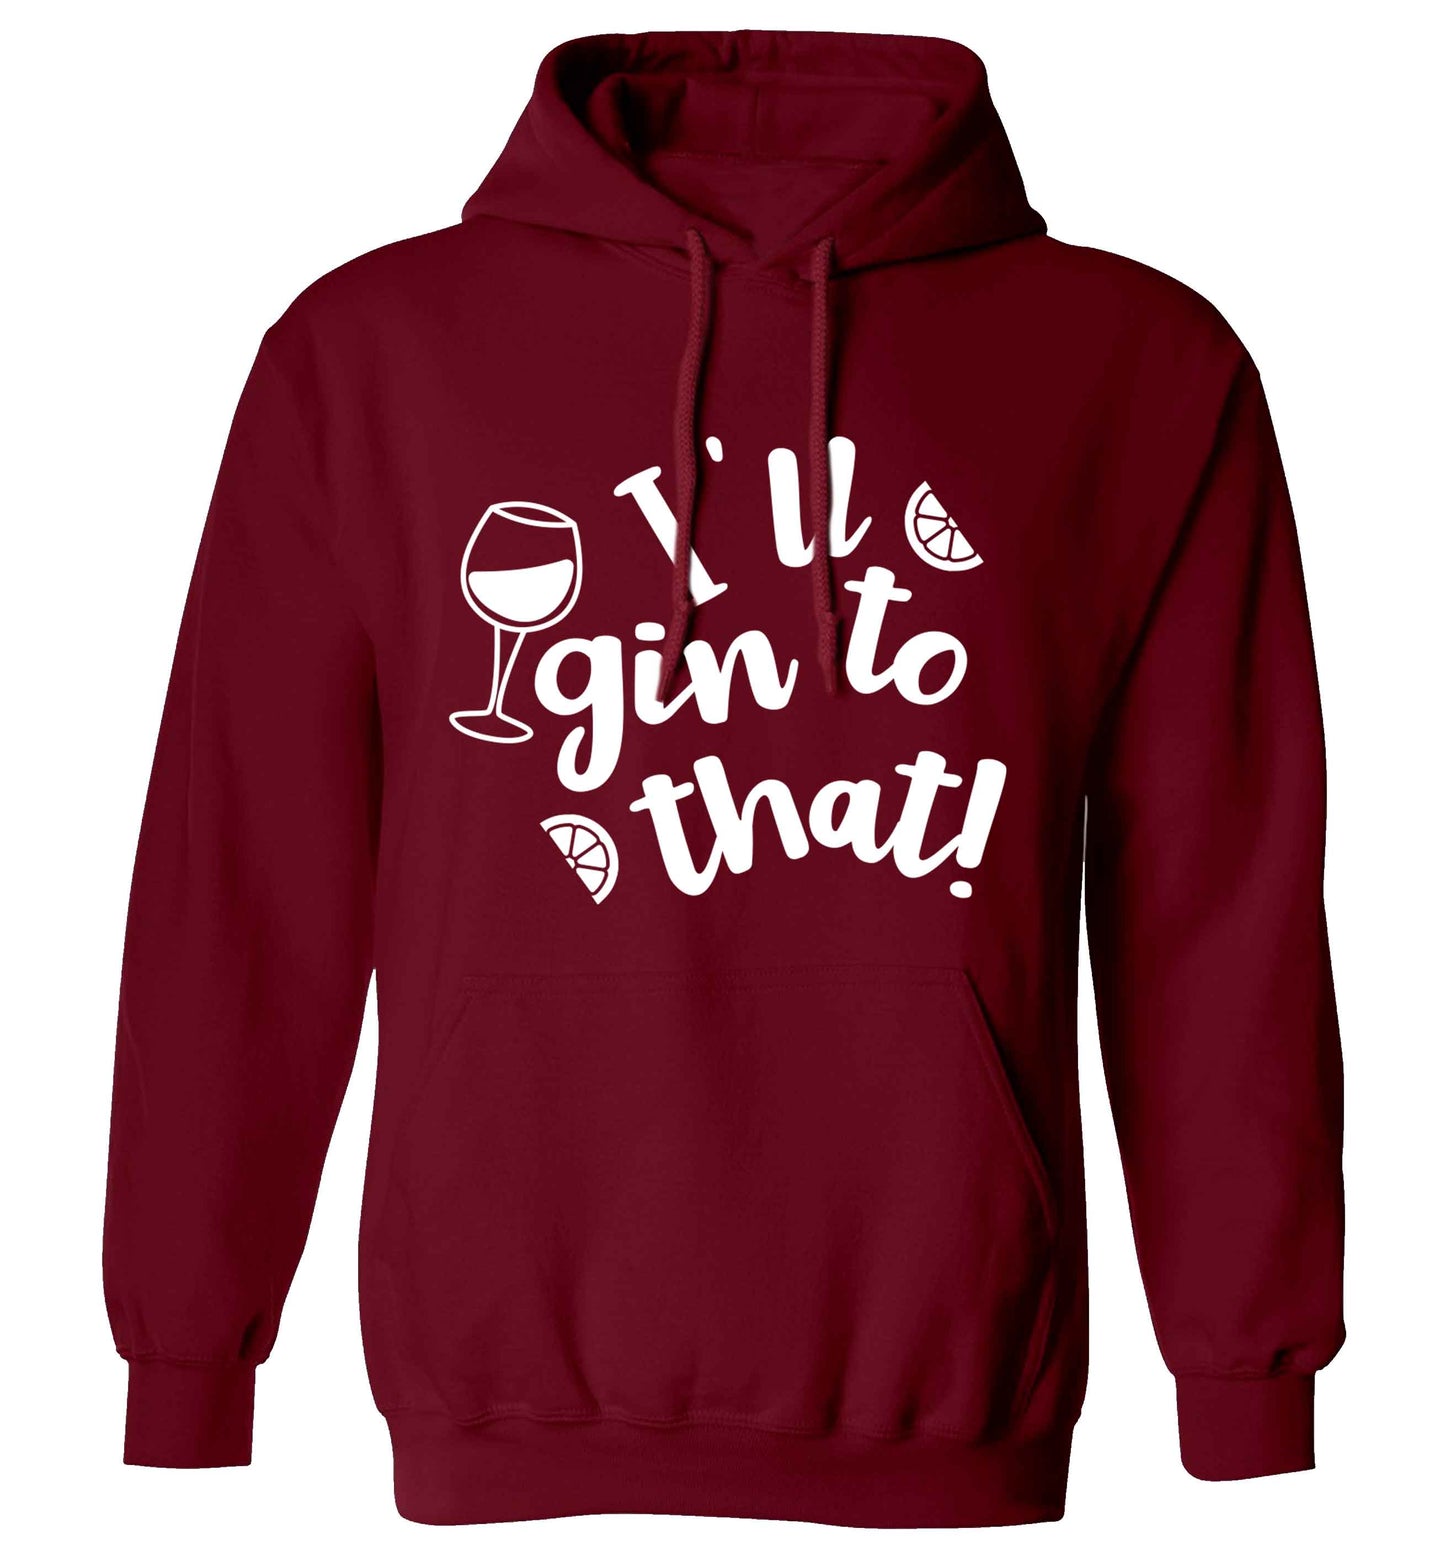 I'll gin to that! adults unisex maroon hoodie 2XL